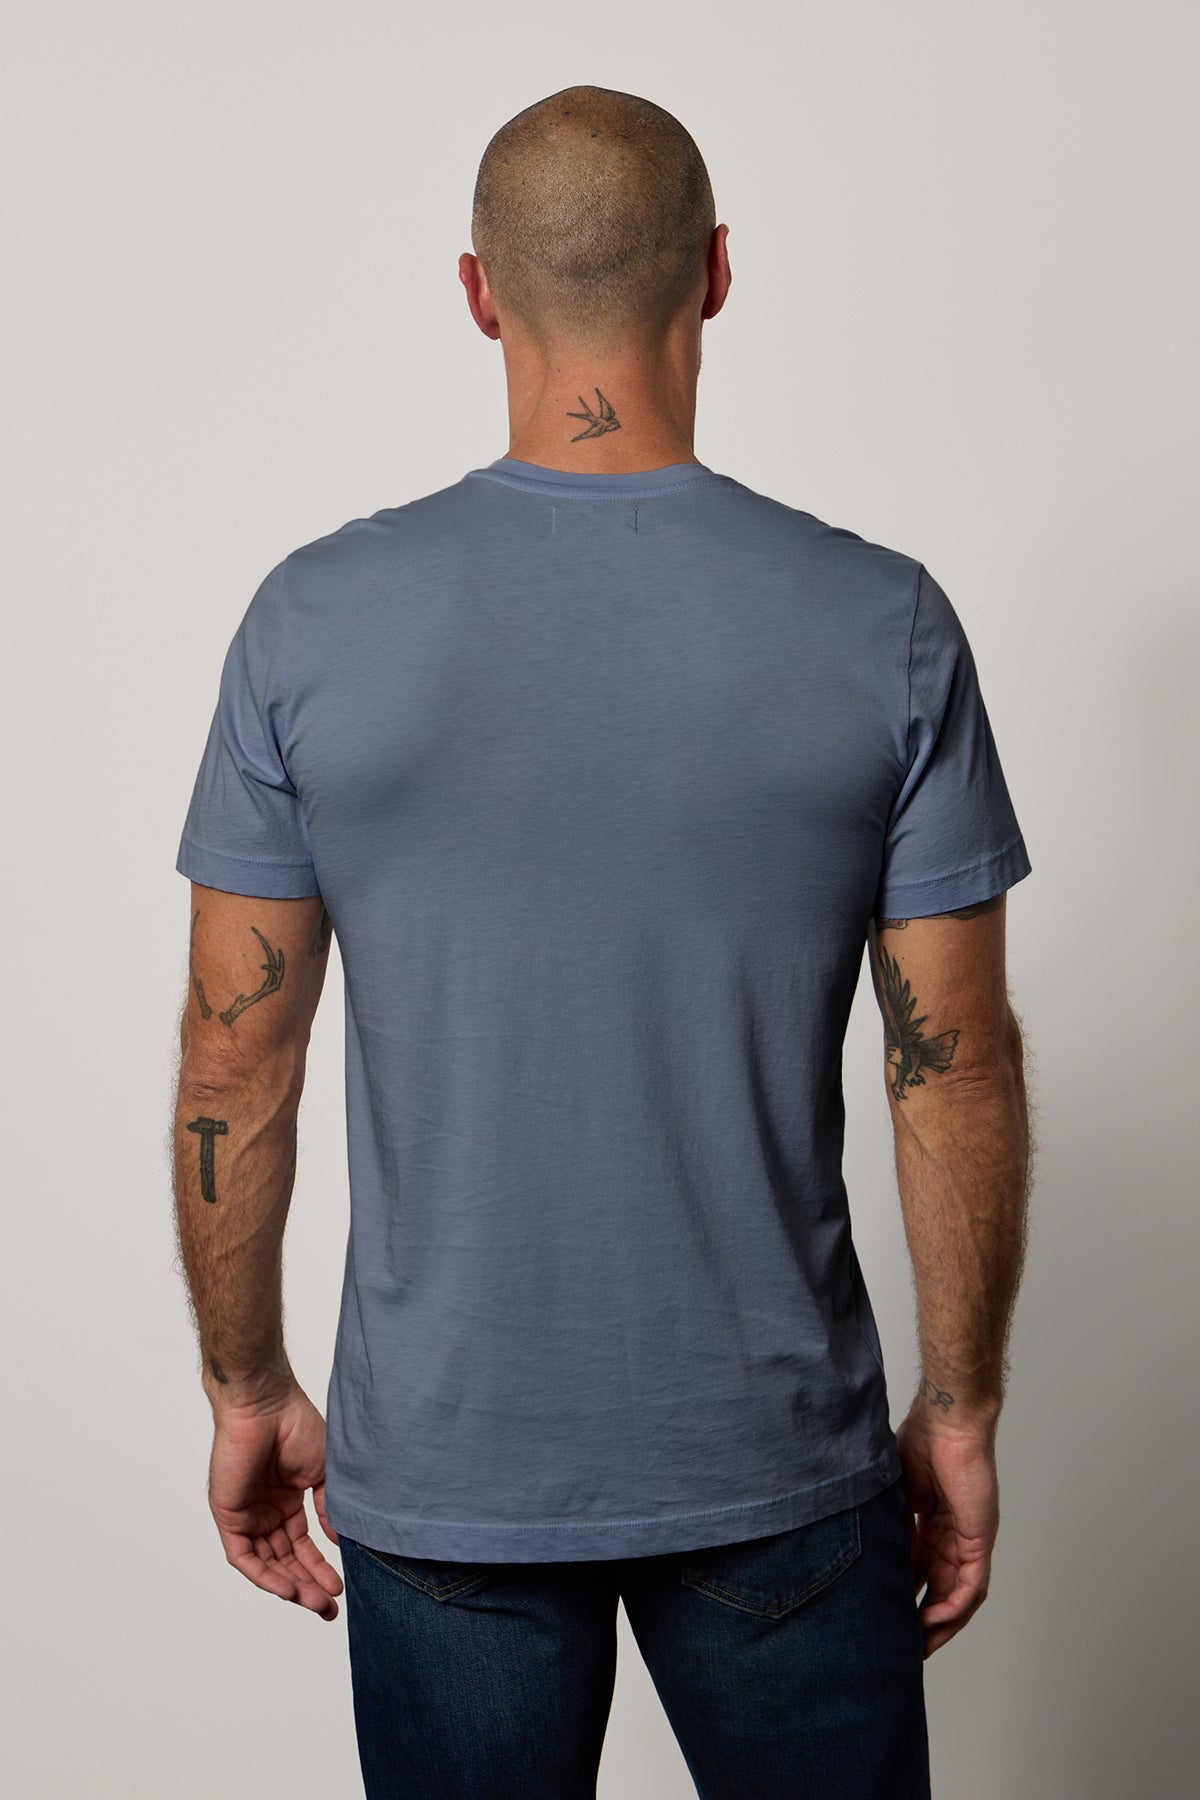   The Velvet by Graham & Spencer Howard Whisper Classic Crew Neck Tee offers a vintage-feel softness from the back view of a man. 